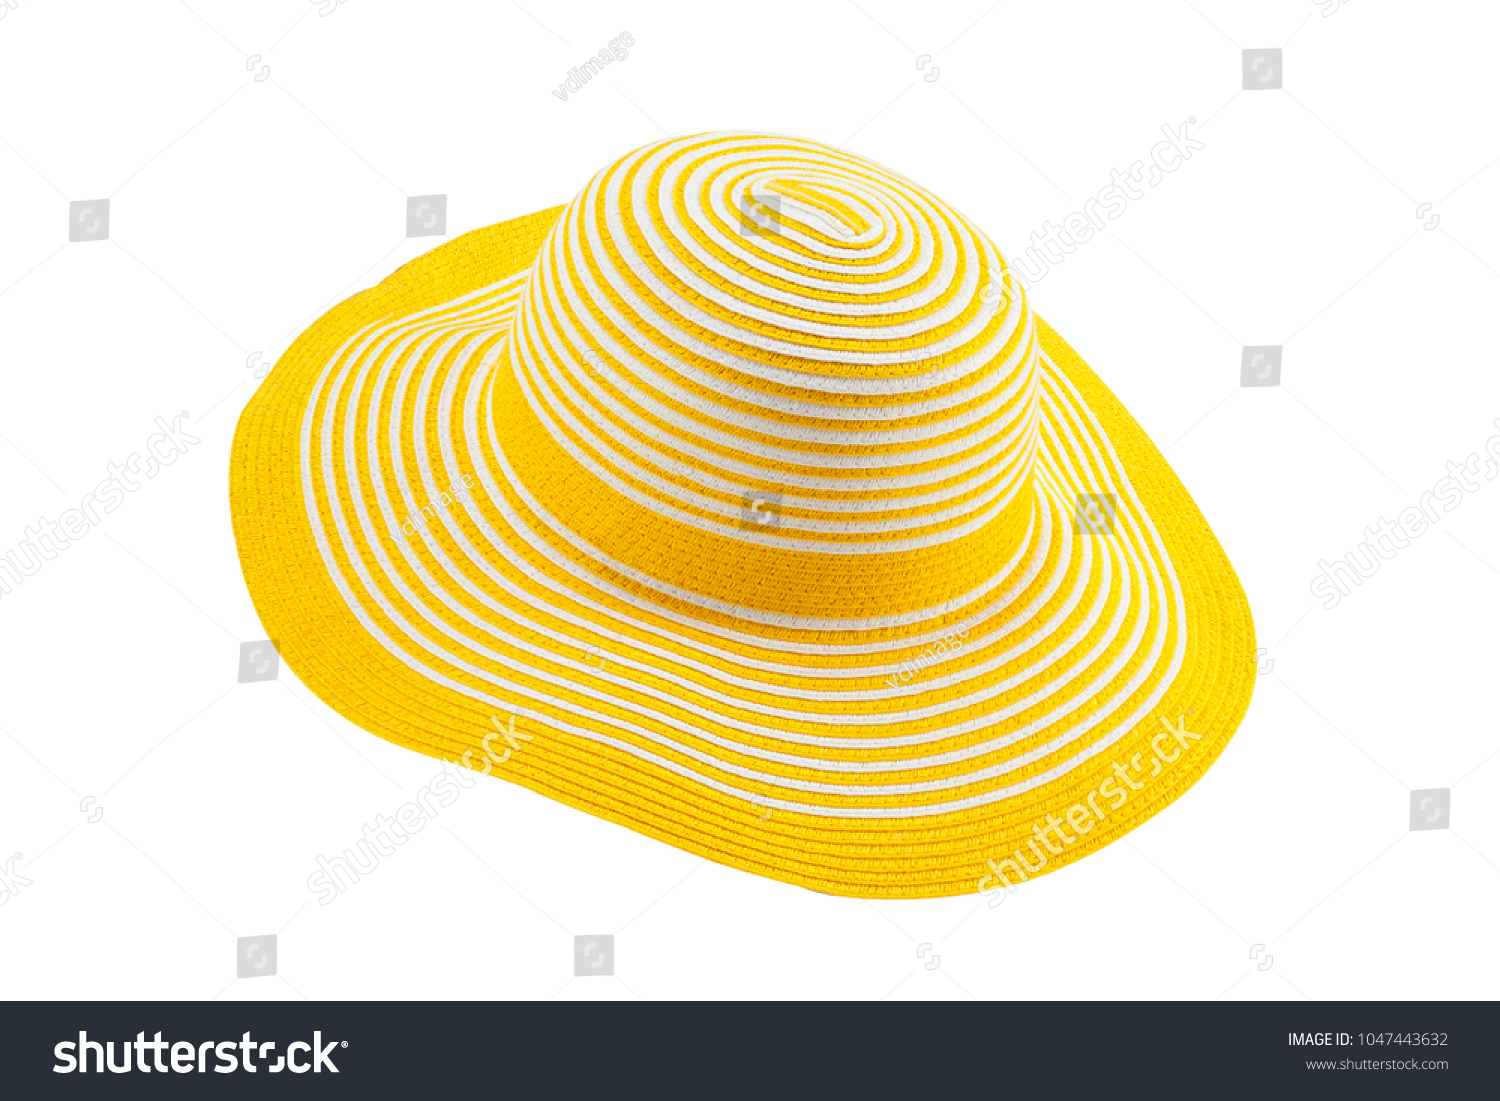  Yellow Sun Hat isolated on white background with clipping path #1047443632